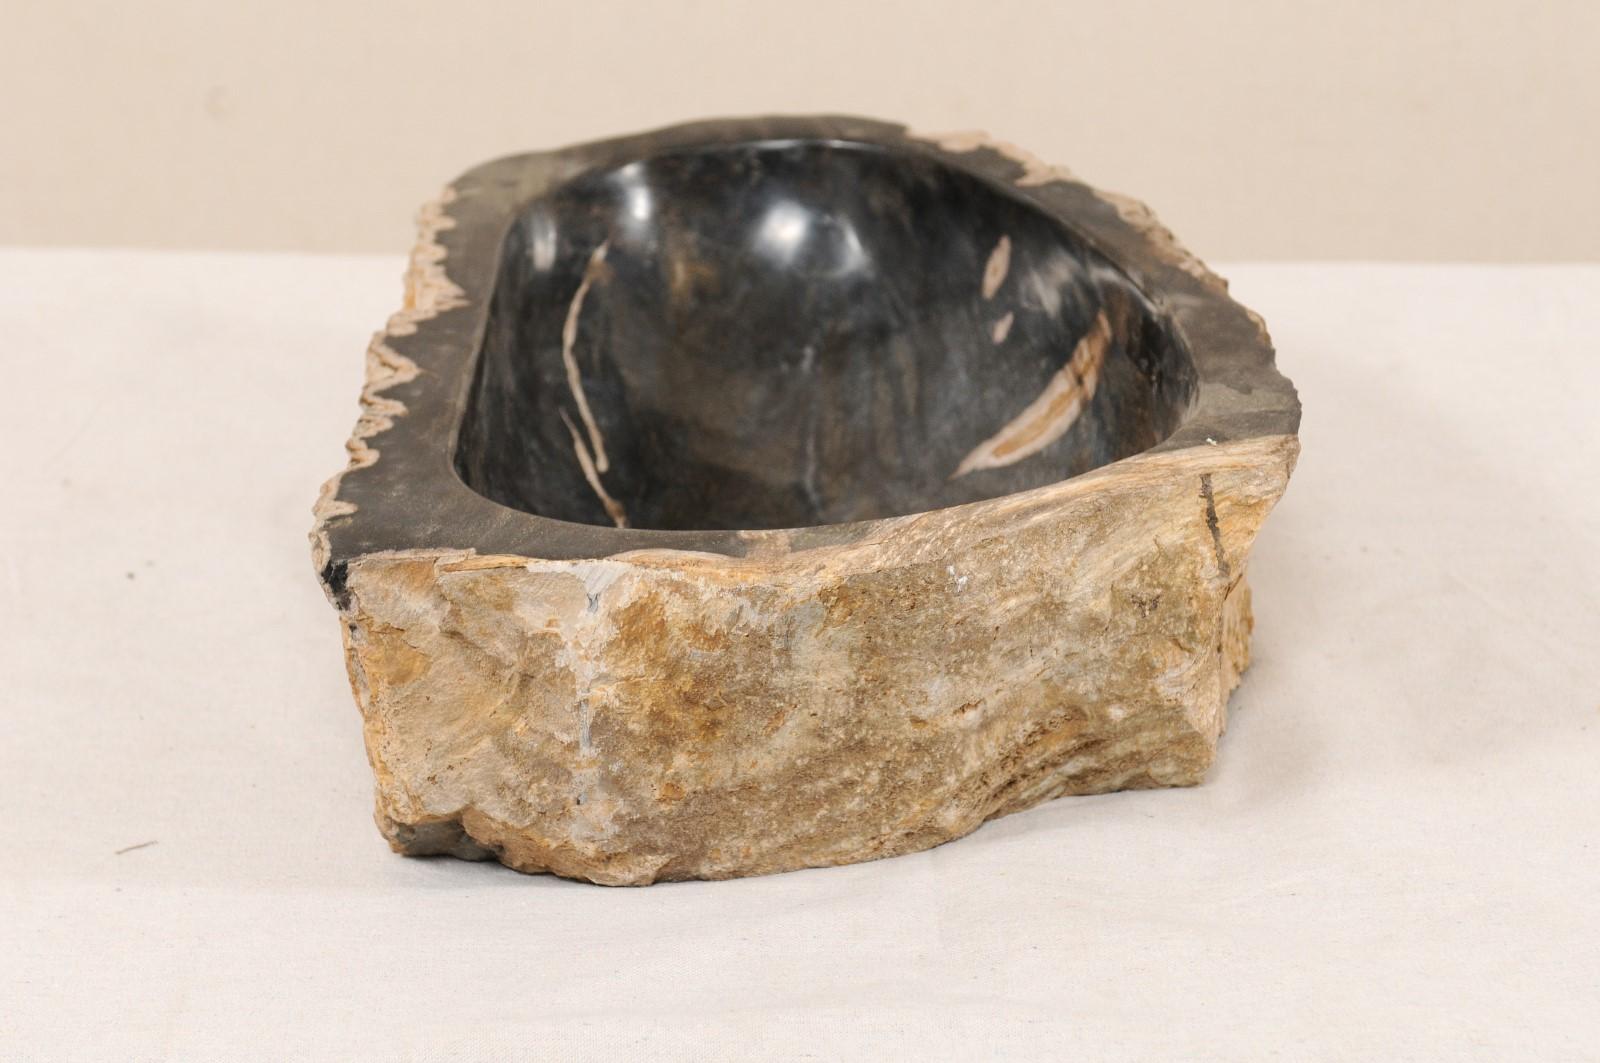 Contemporary Single Polished Petrified Wood Sink in Tan, Black and Brown Colors